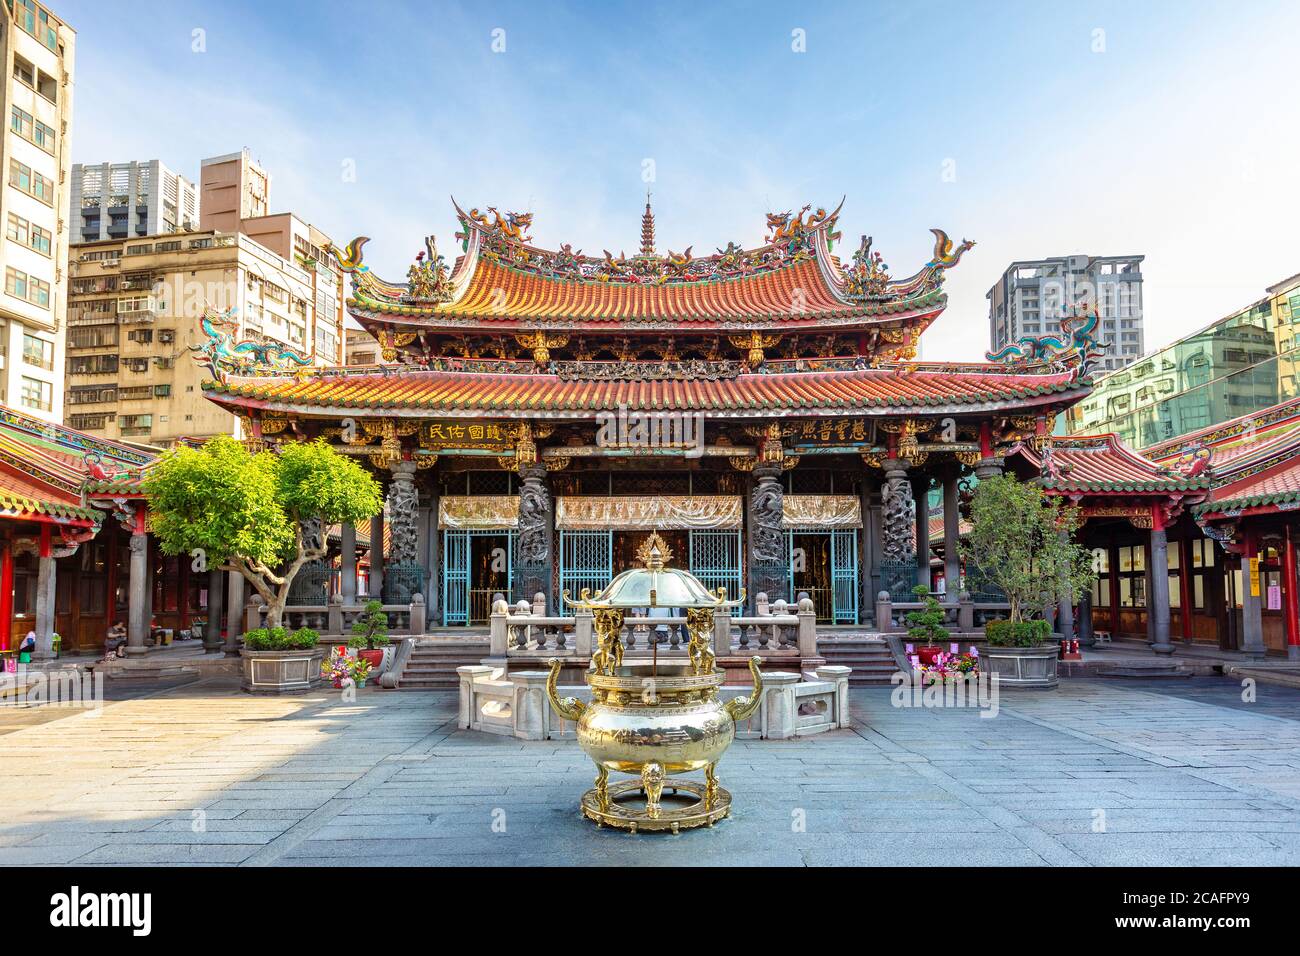 Lungshan Temple in Taipei,Taiwan. The Chinese text is 'Protect the people', 'Grace and fertility' and 'Grace illuminates all creatures'. The Chinese t Stock Photo